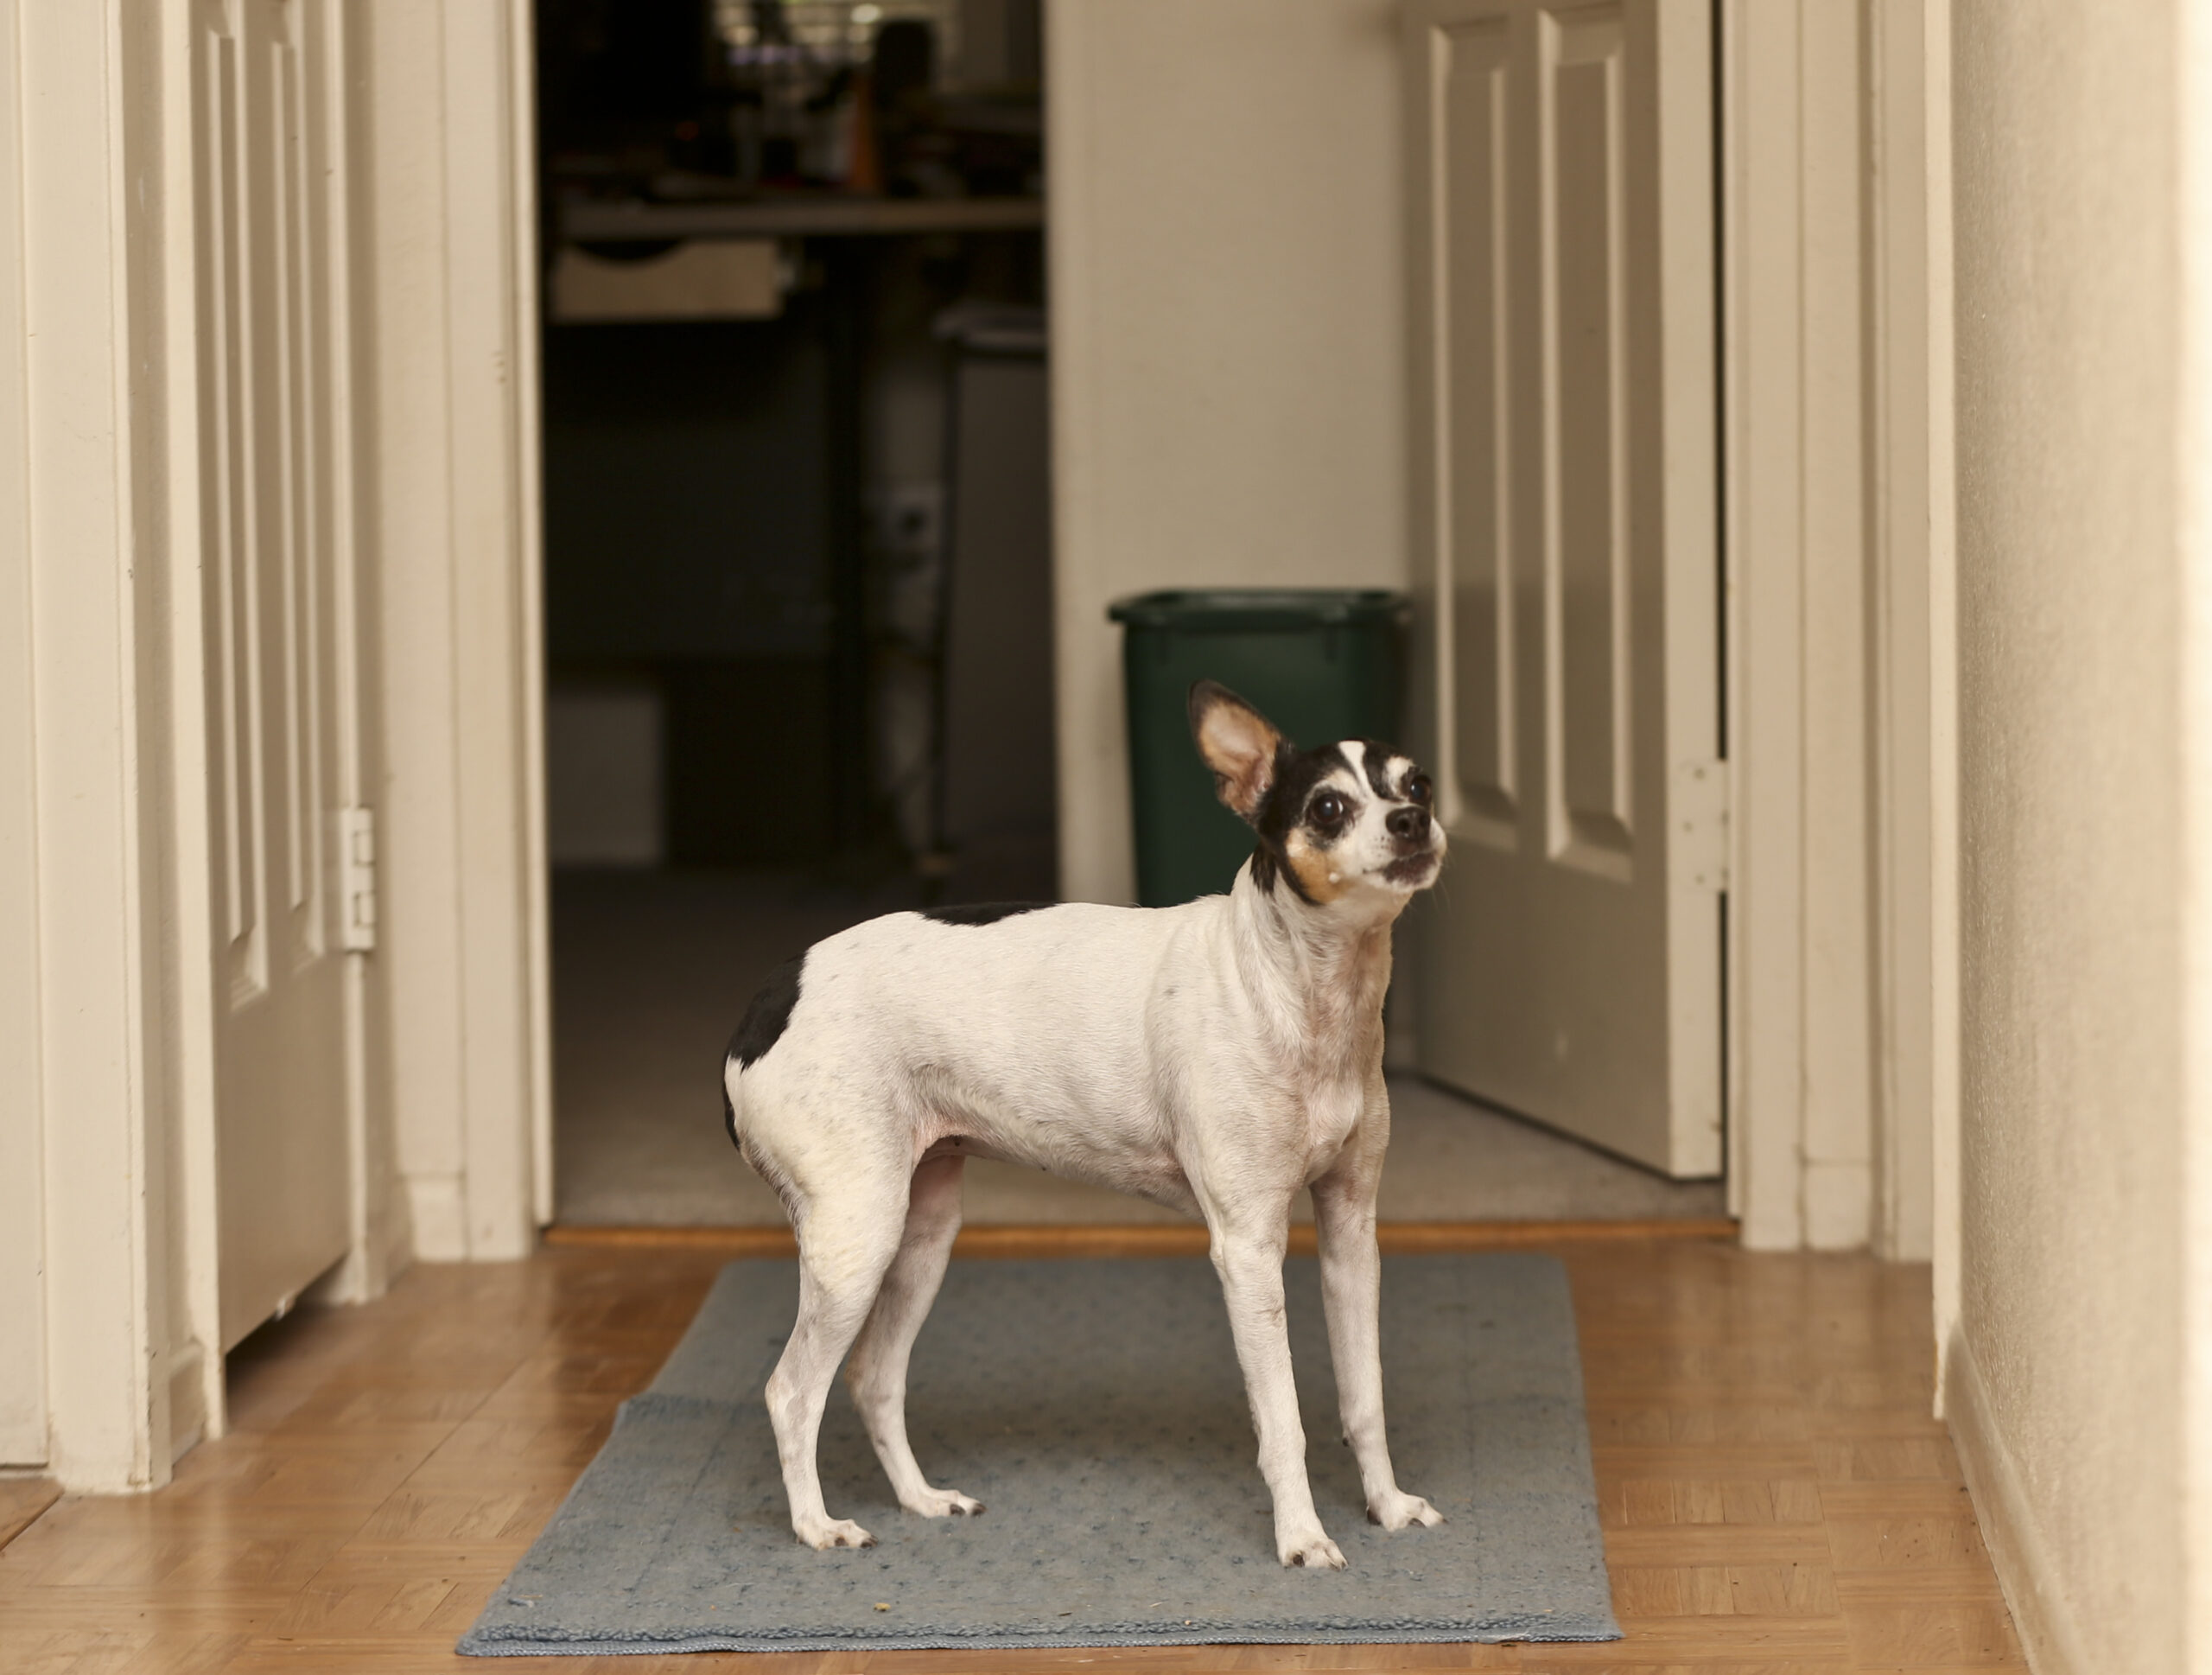 A rat terrier stands anxiously in a hallway